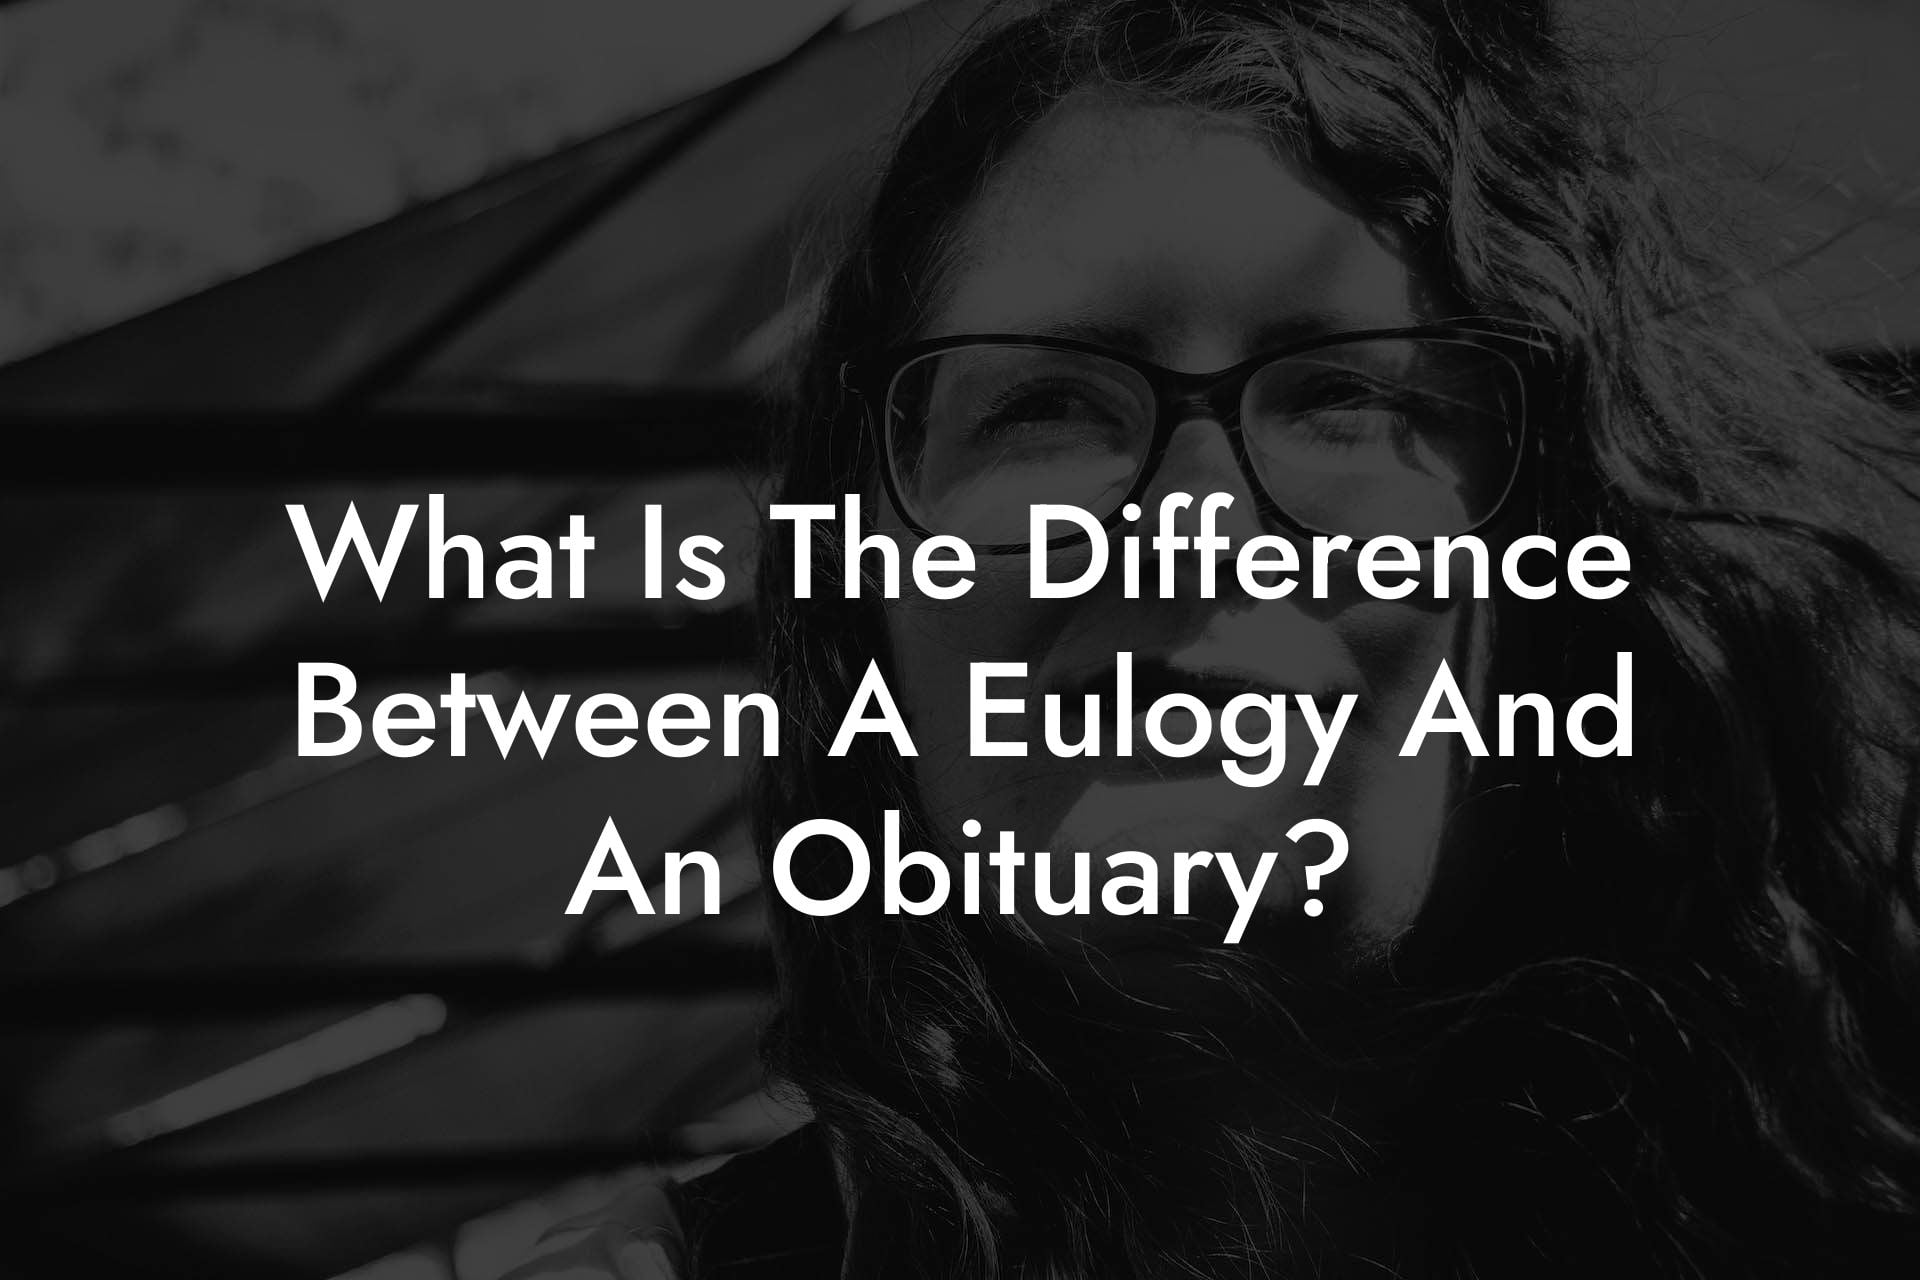 What Is The Difference Between A Eulogy And An Obituary